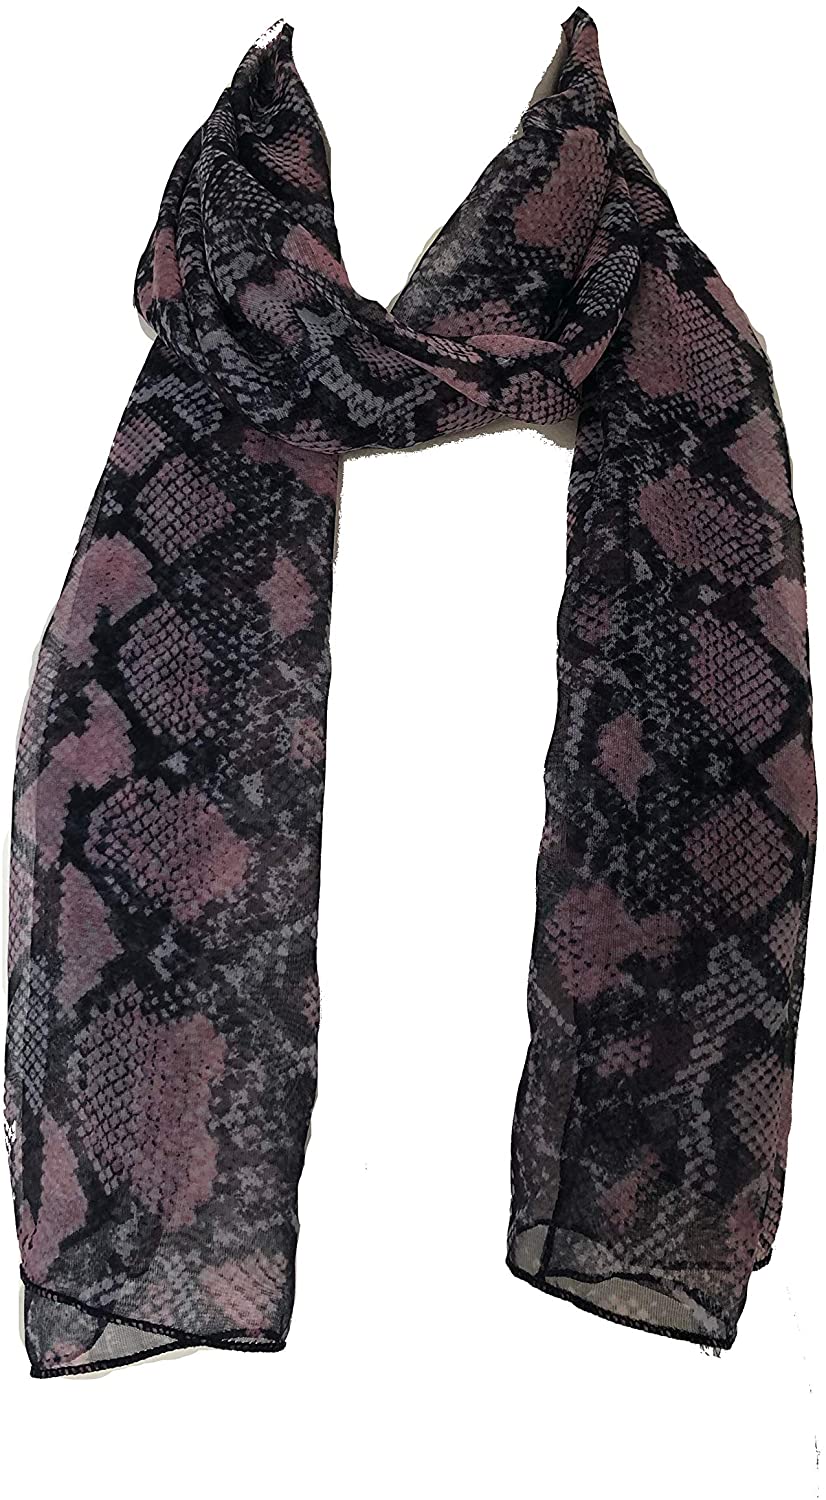 Black/Pink Snake Skin Print Thin Chiffon Style Pretty Scarf Great for Any Outfit Lovely Gift